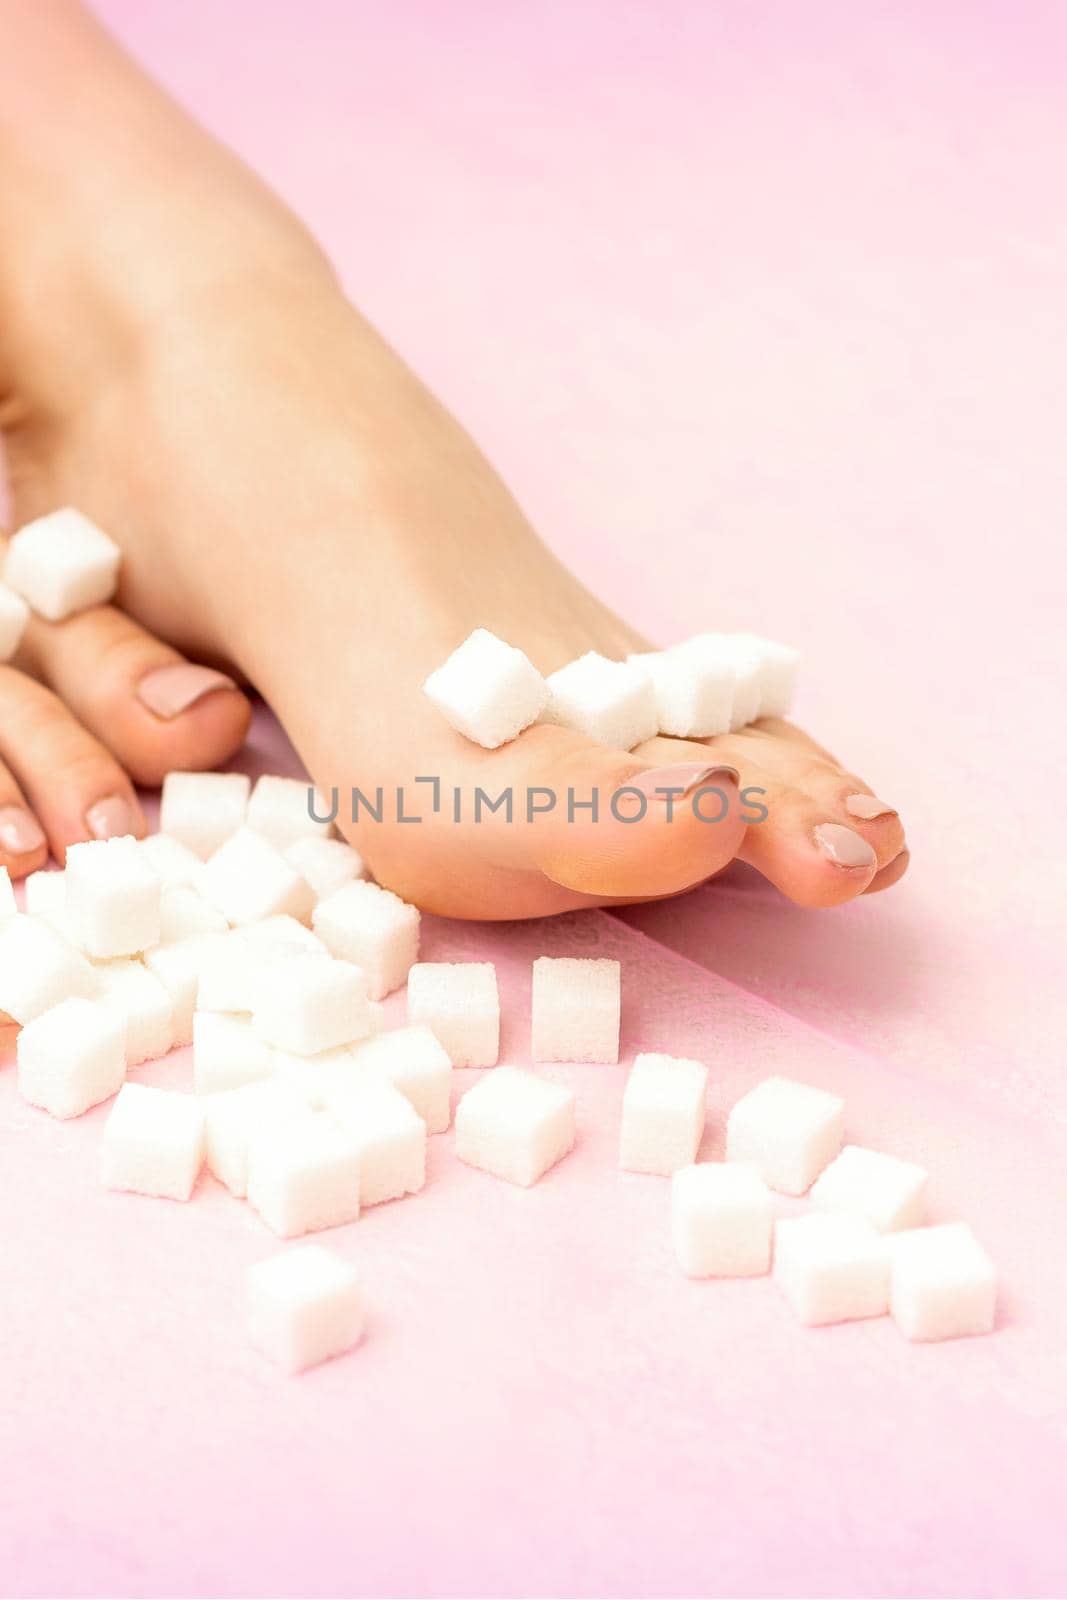 Sugar cubes lying in a row on female feet on pink background with copy space, depilation concept. by okskukuruza